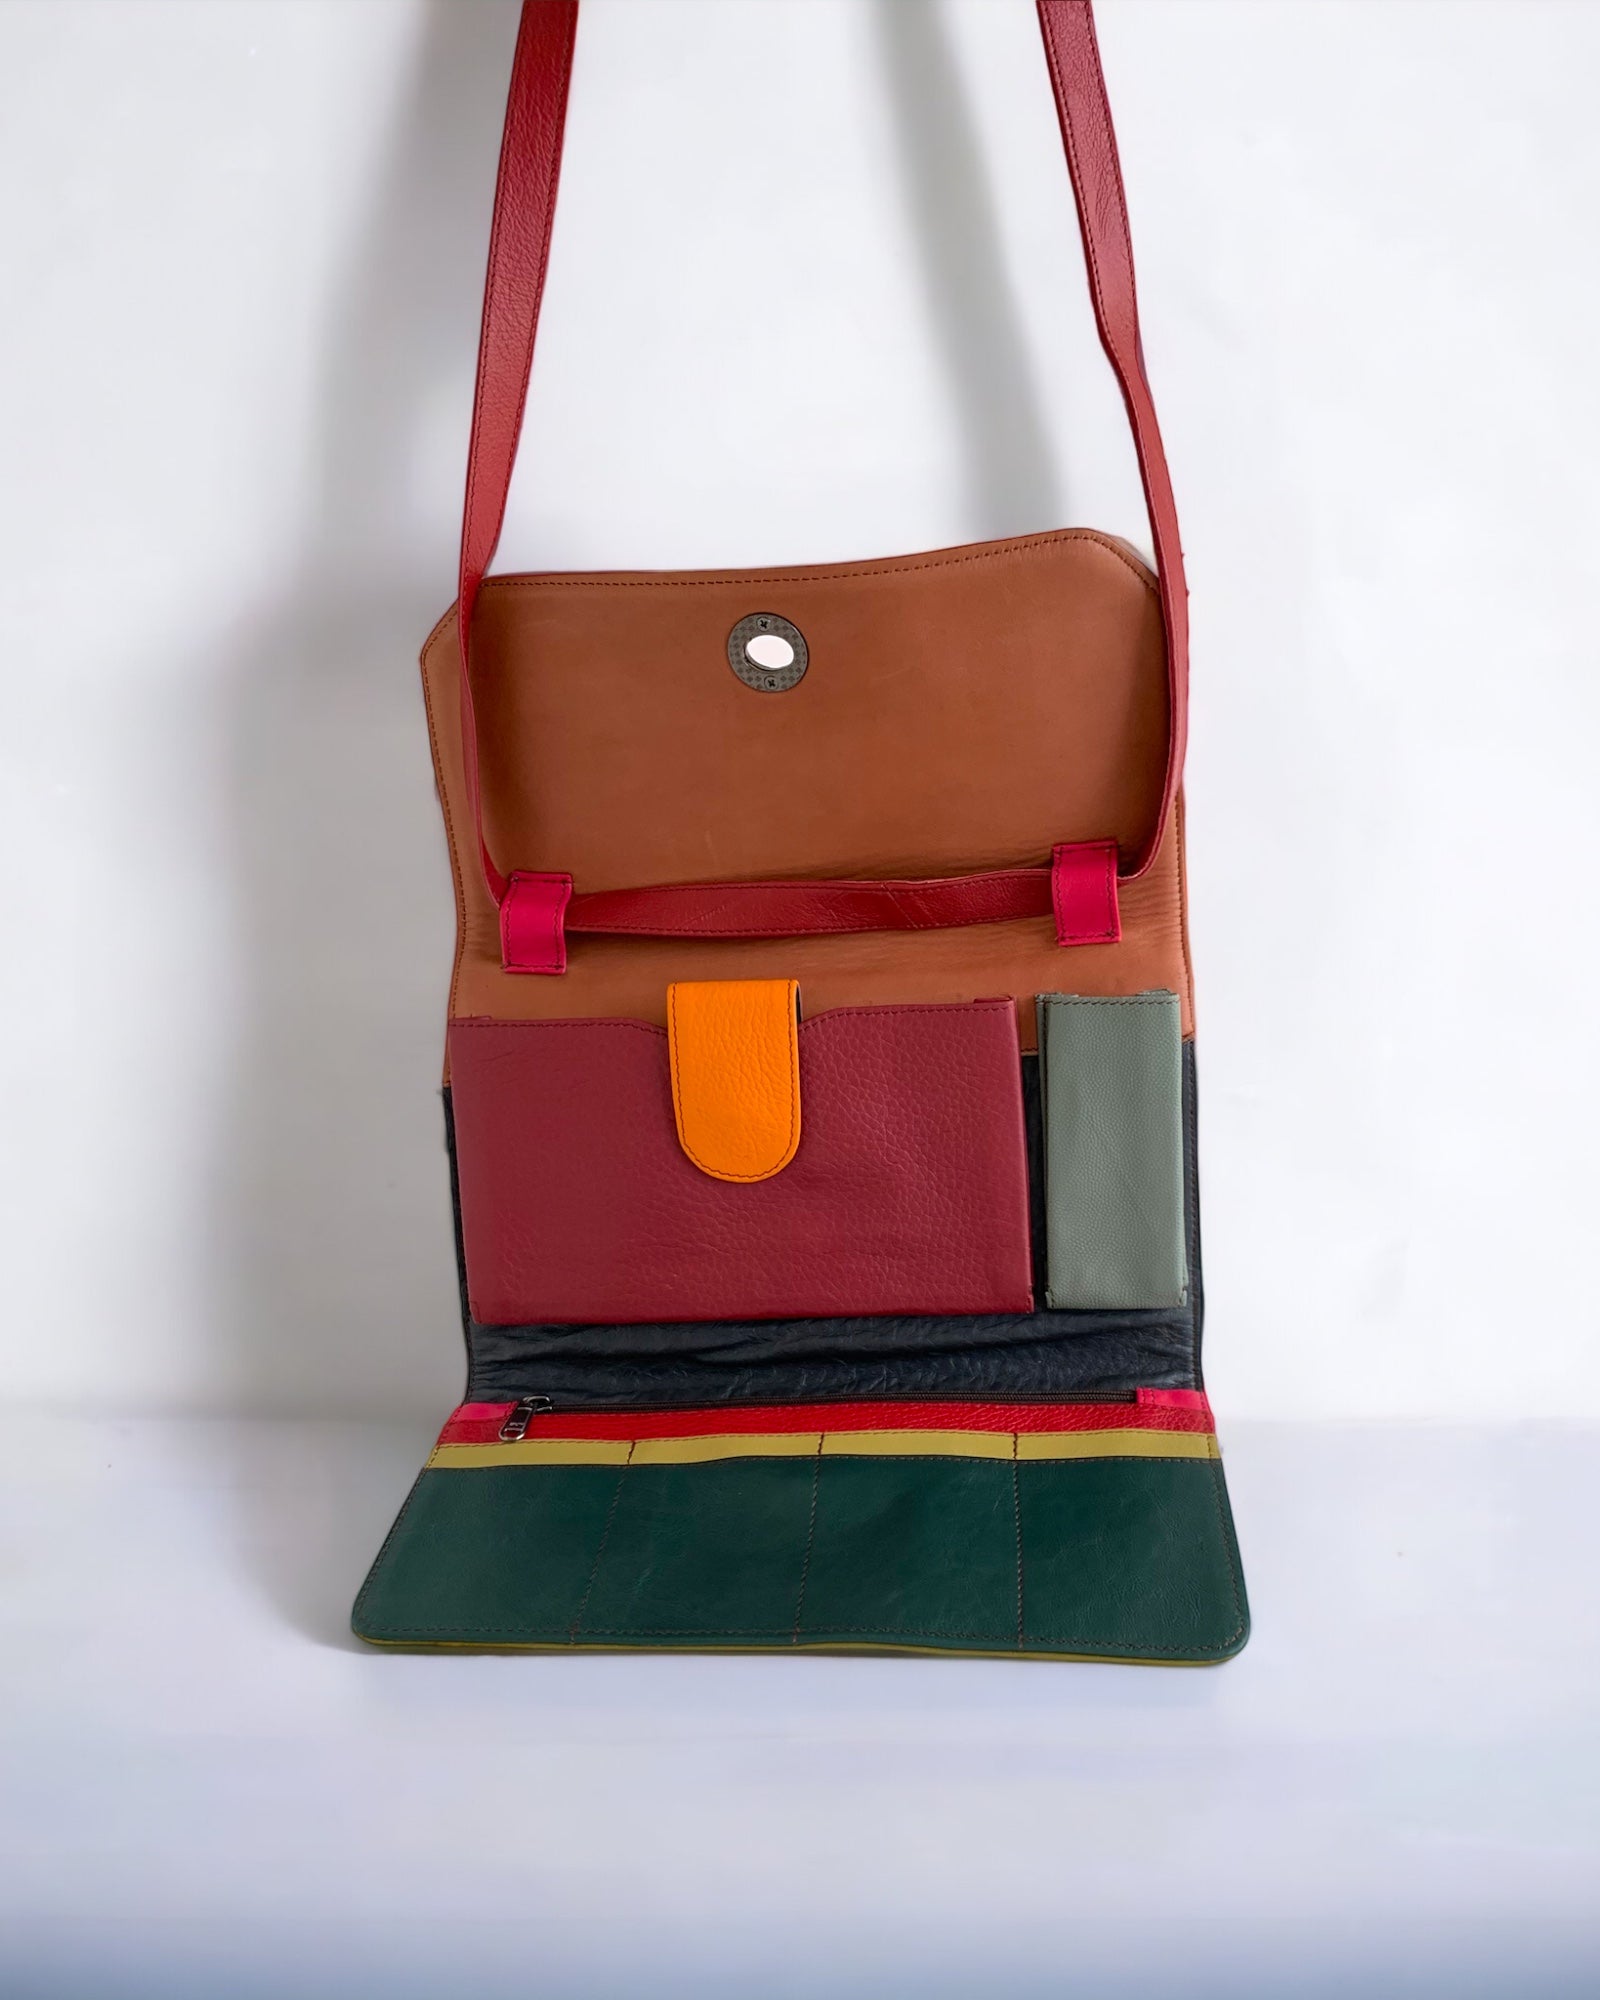 The Soruka Multi-Function Purse. Available at Kadou Boutique with Free Shipping. The green and orange purse from inside. Showing the phone pocket, the essentials pocket, the 8 credit cards slots and the zipper pocket.